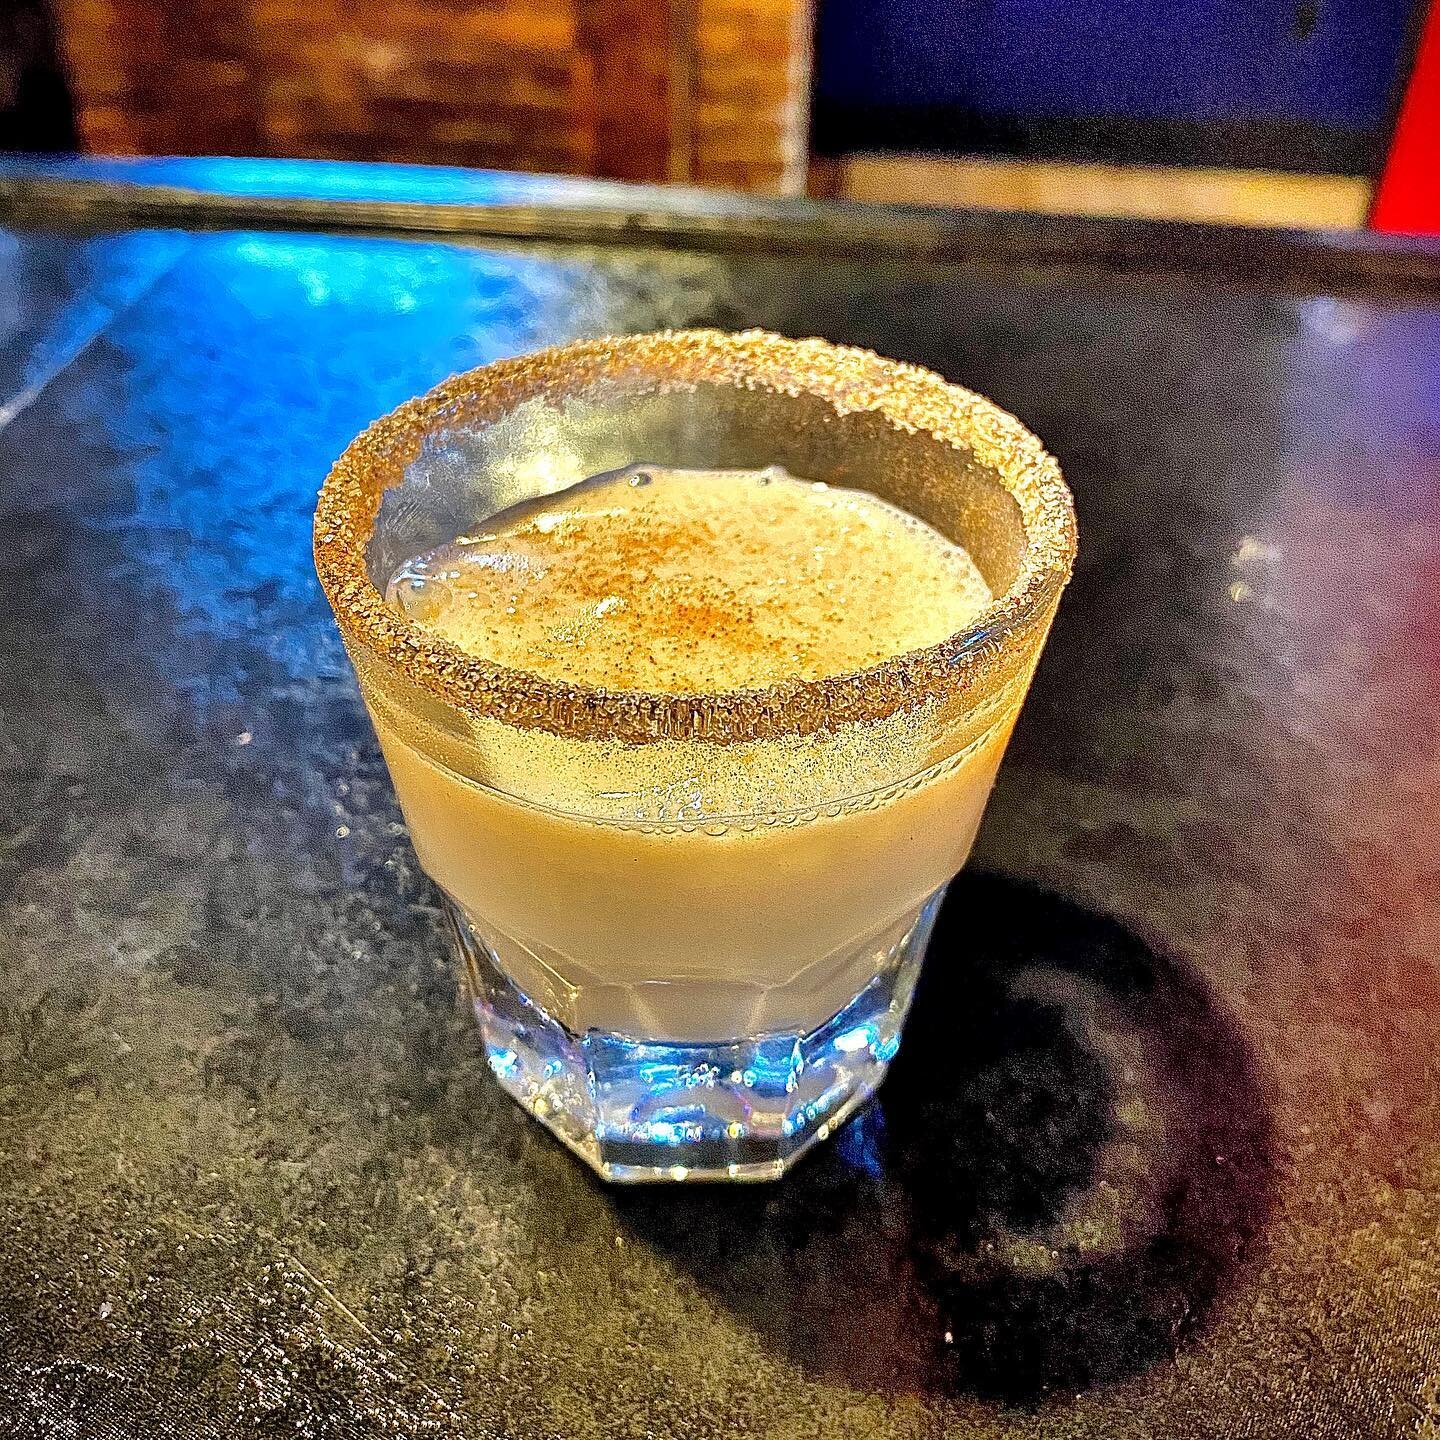 Since serving milk and cereal at a bar isn&rsquo;t socially acceptable, we are serving Cinnamon Toast Crunch shots 🤤🔥 #cinnamontoastcrunch #fireball #rumchata #shots #dayton @daytonchicks @daytonflyers @barstoolflyers @barstoolsports